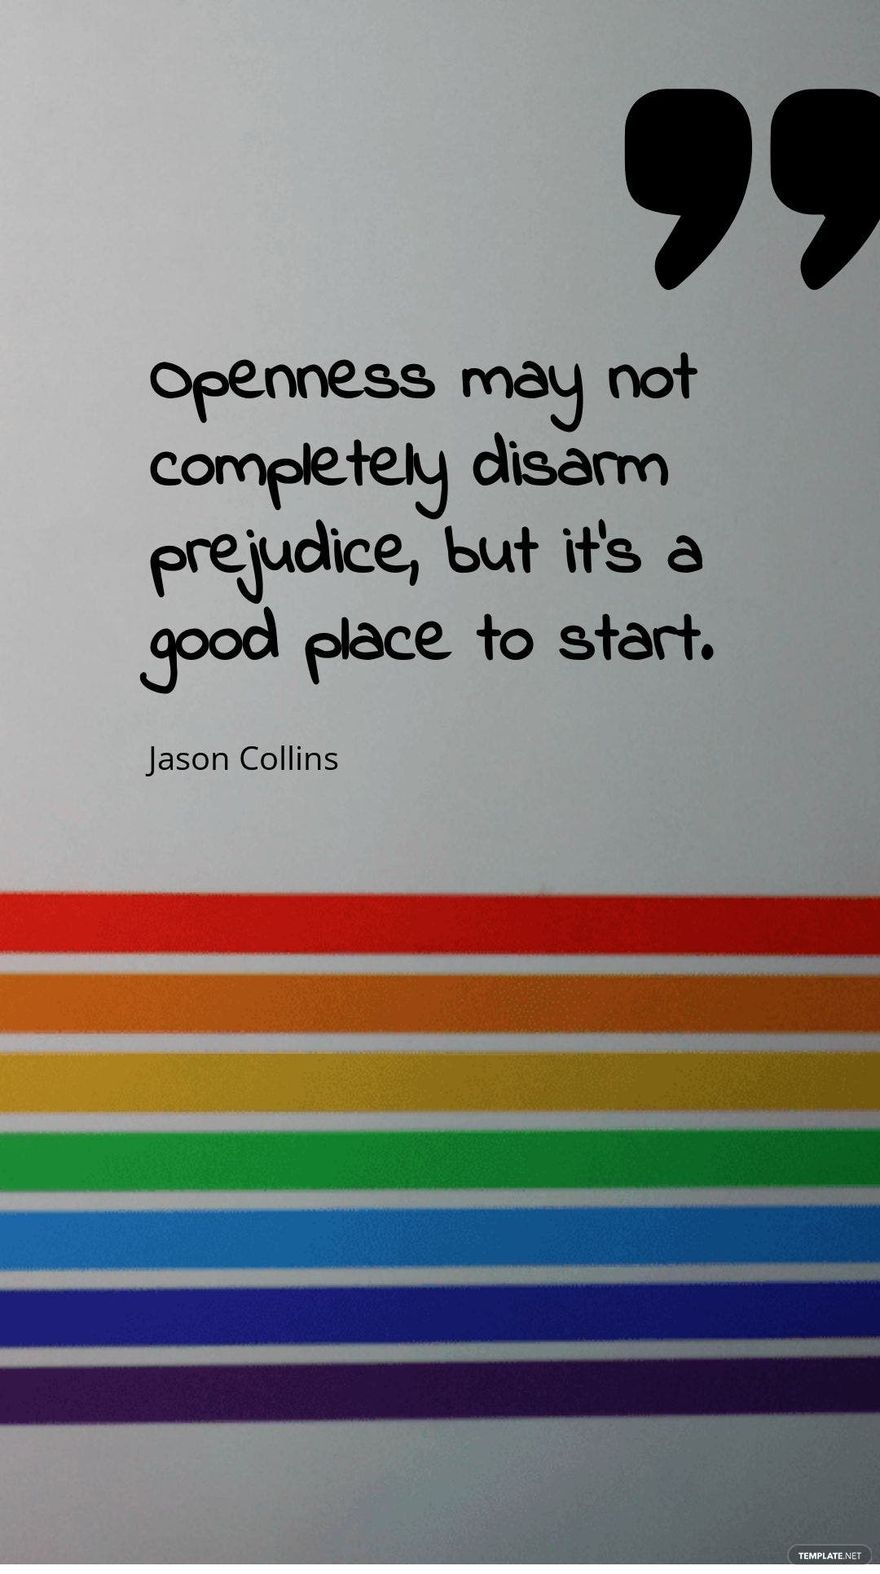 Jason Collins - Openness may not completely disarm prejudice, but it's a good place to start. in JPG